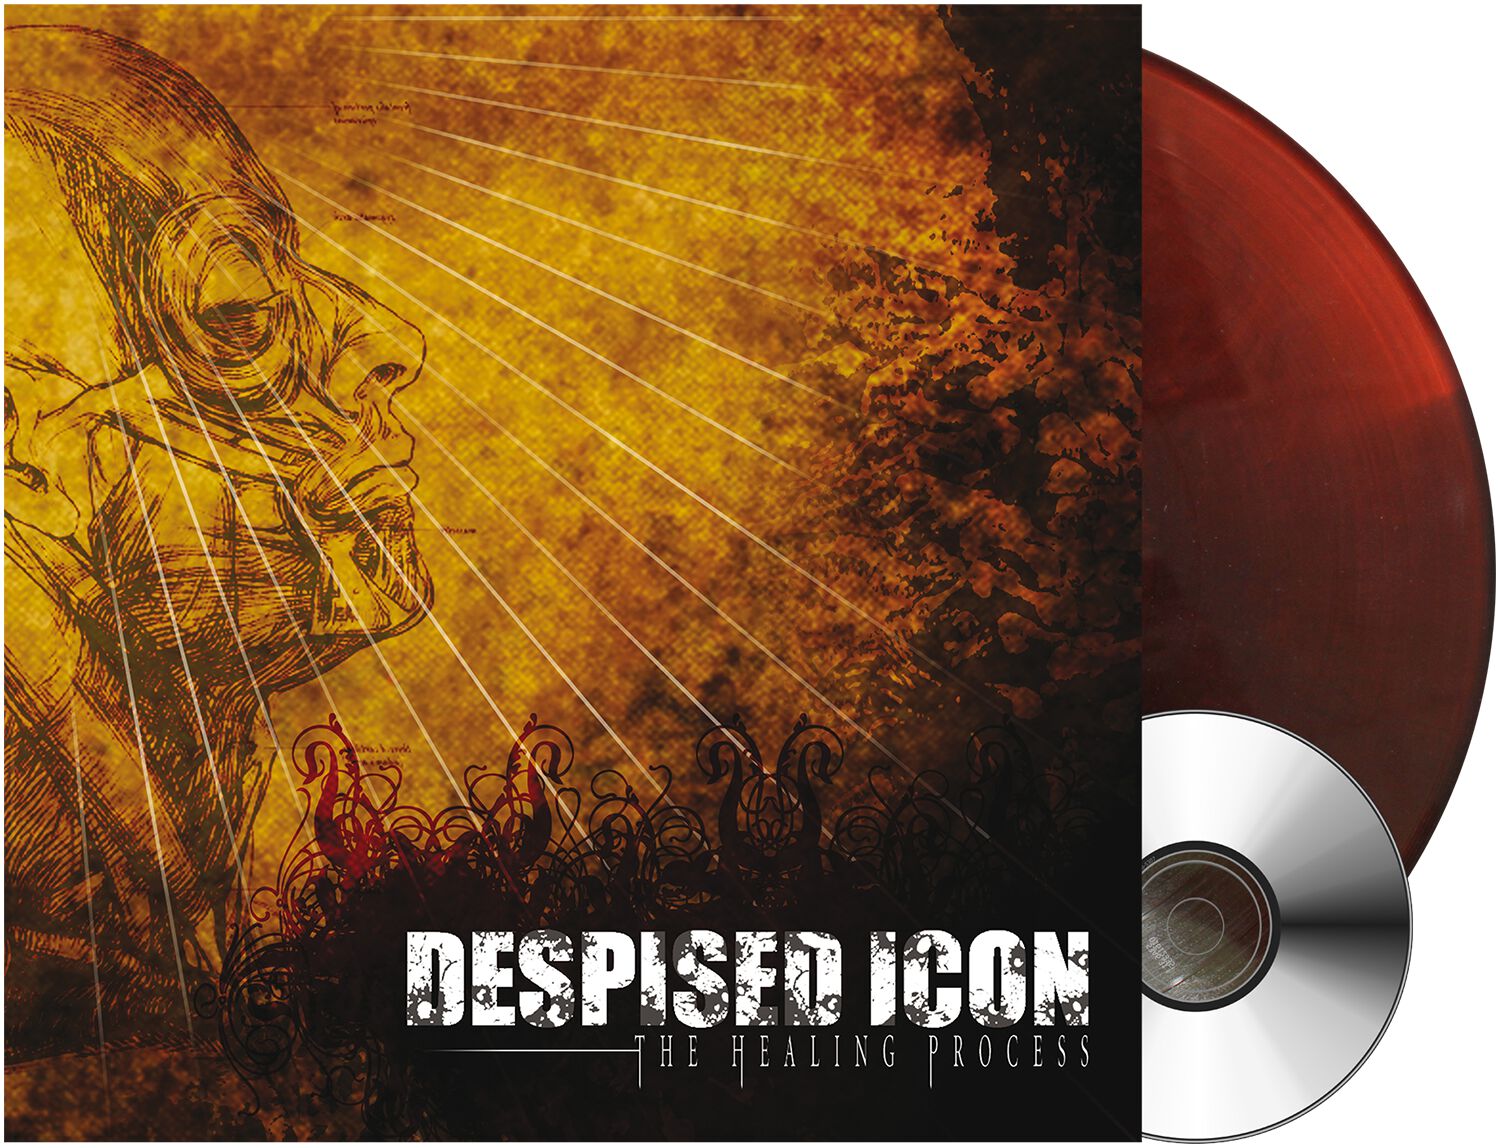 Despised Icon The healing process LP coloured